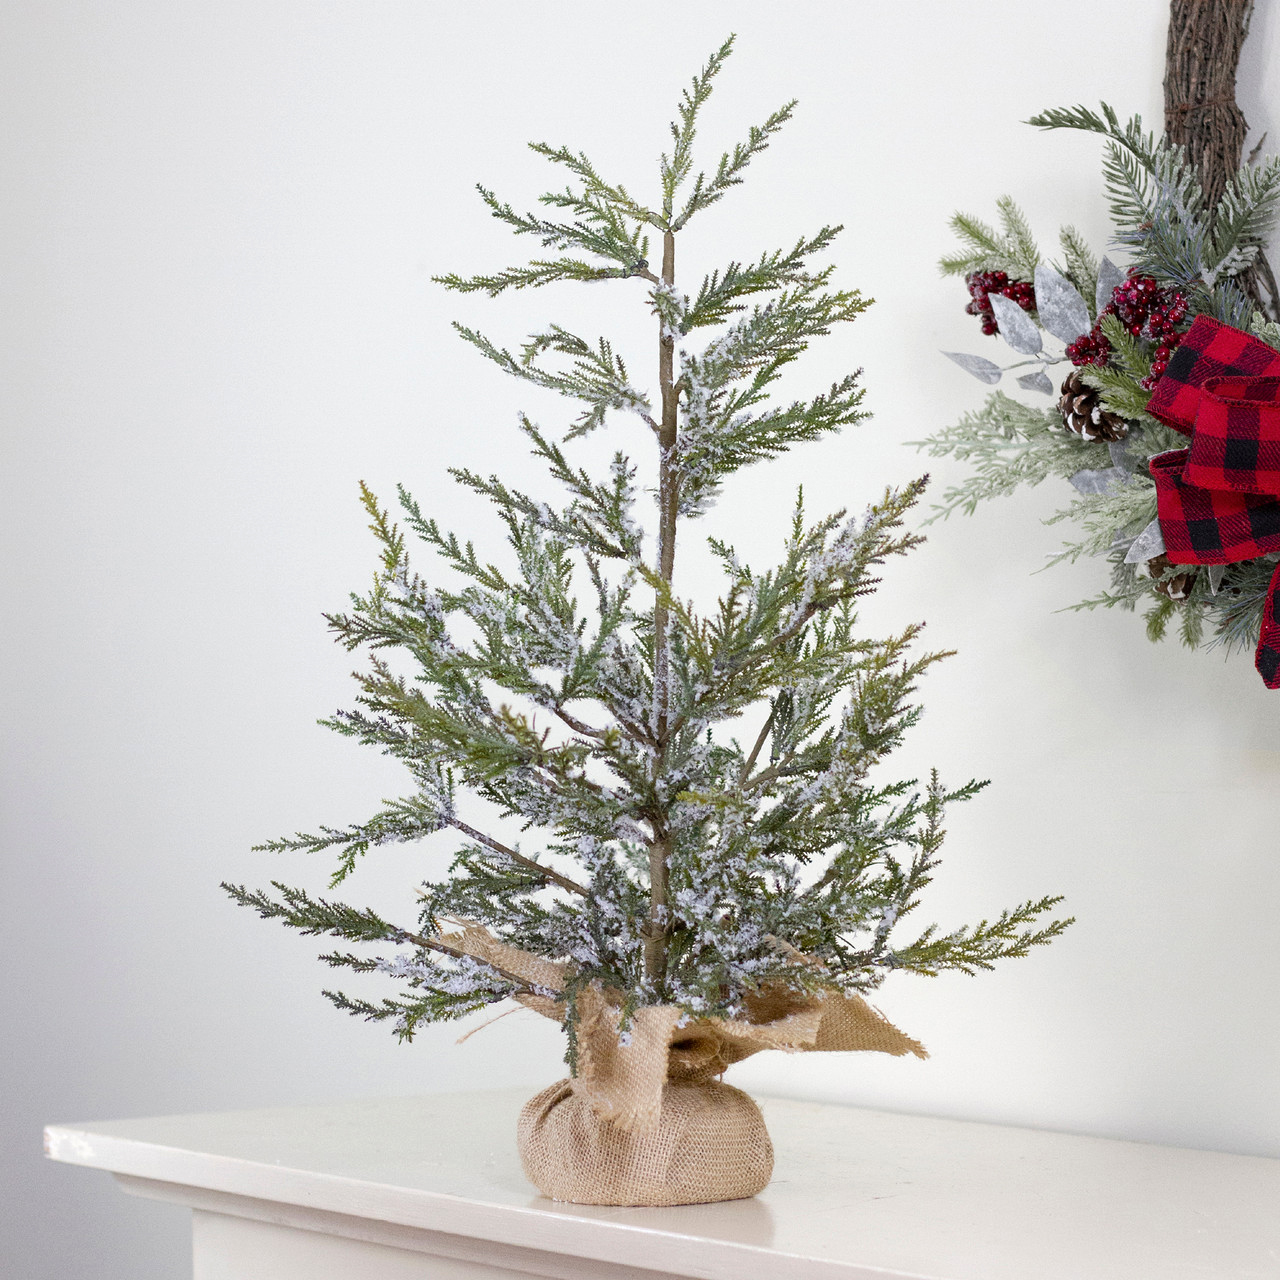 tabletop potted Christmas tree shown on a fireplace mantel